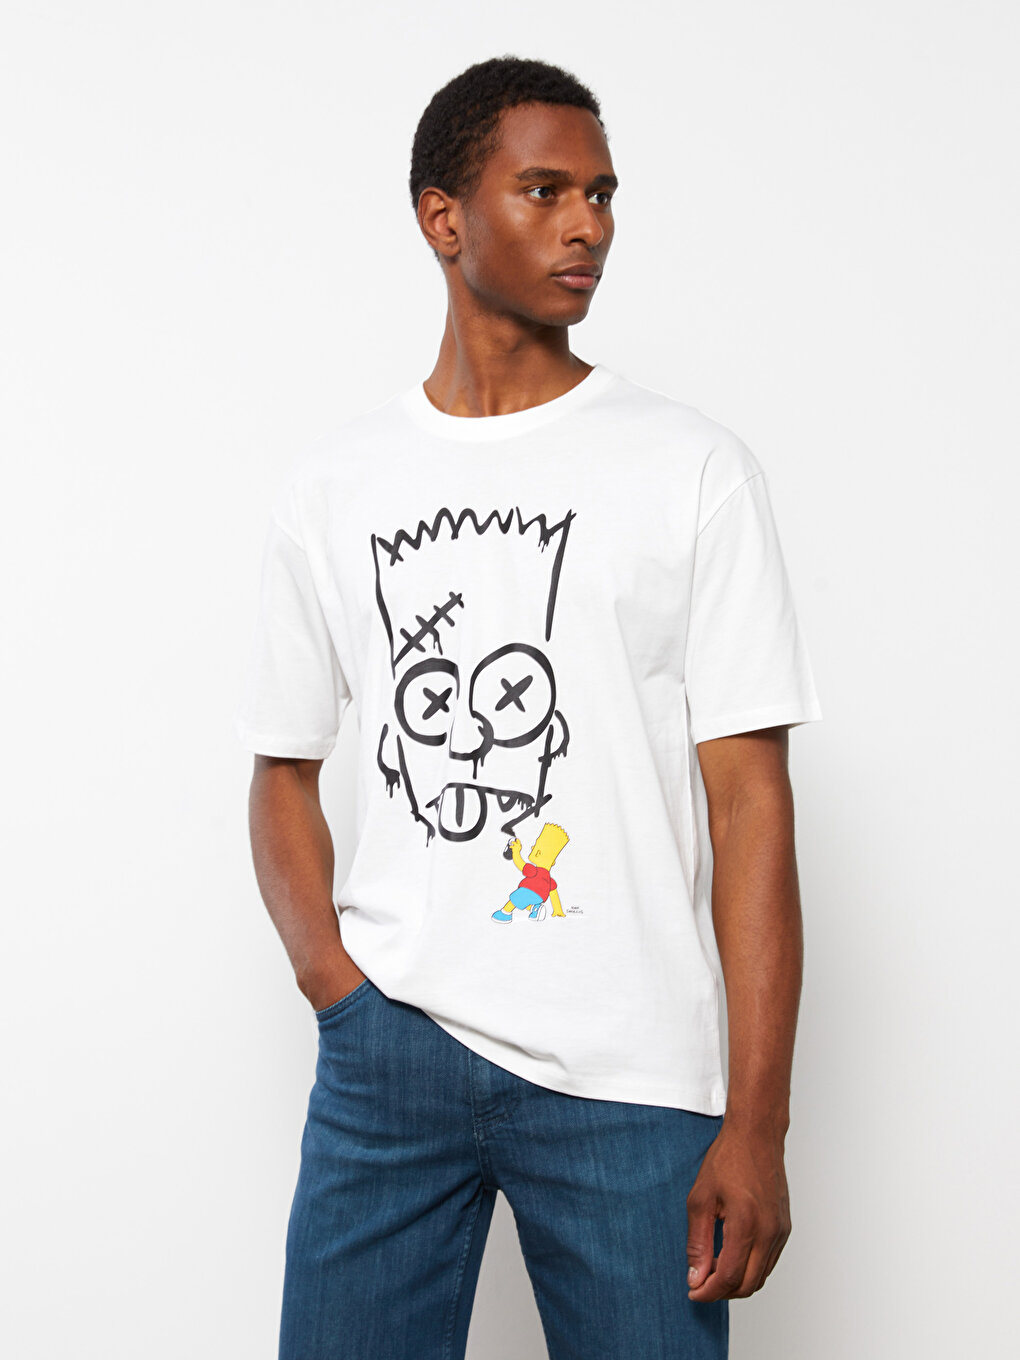 Crew Neck Short Sleeve The Simpsons Printed Combed Cotton Men's T-Shirt ...